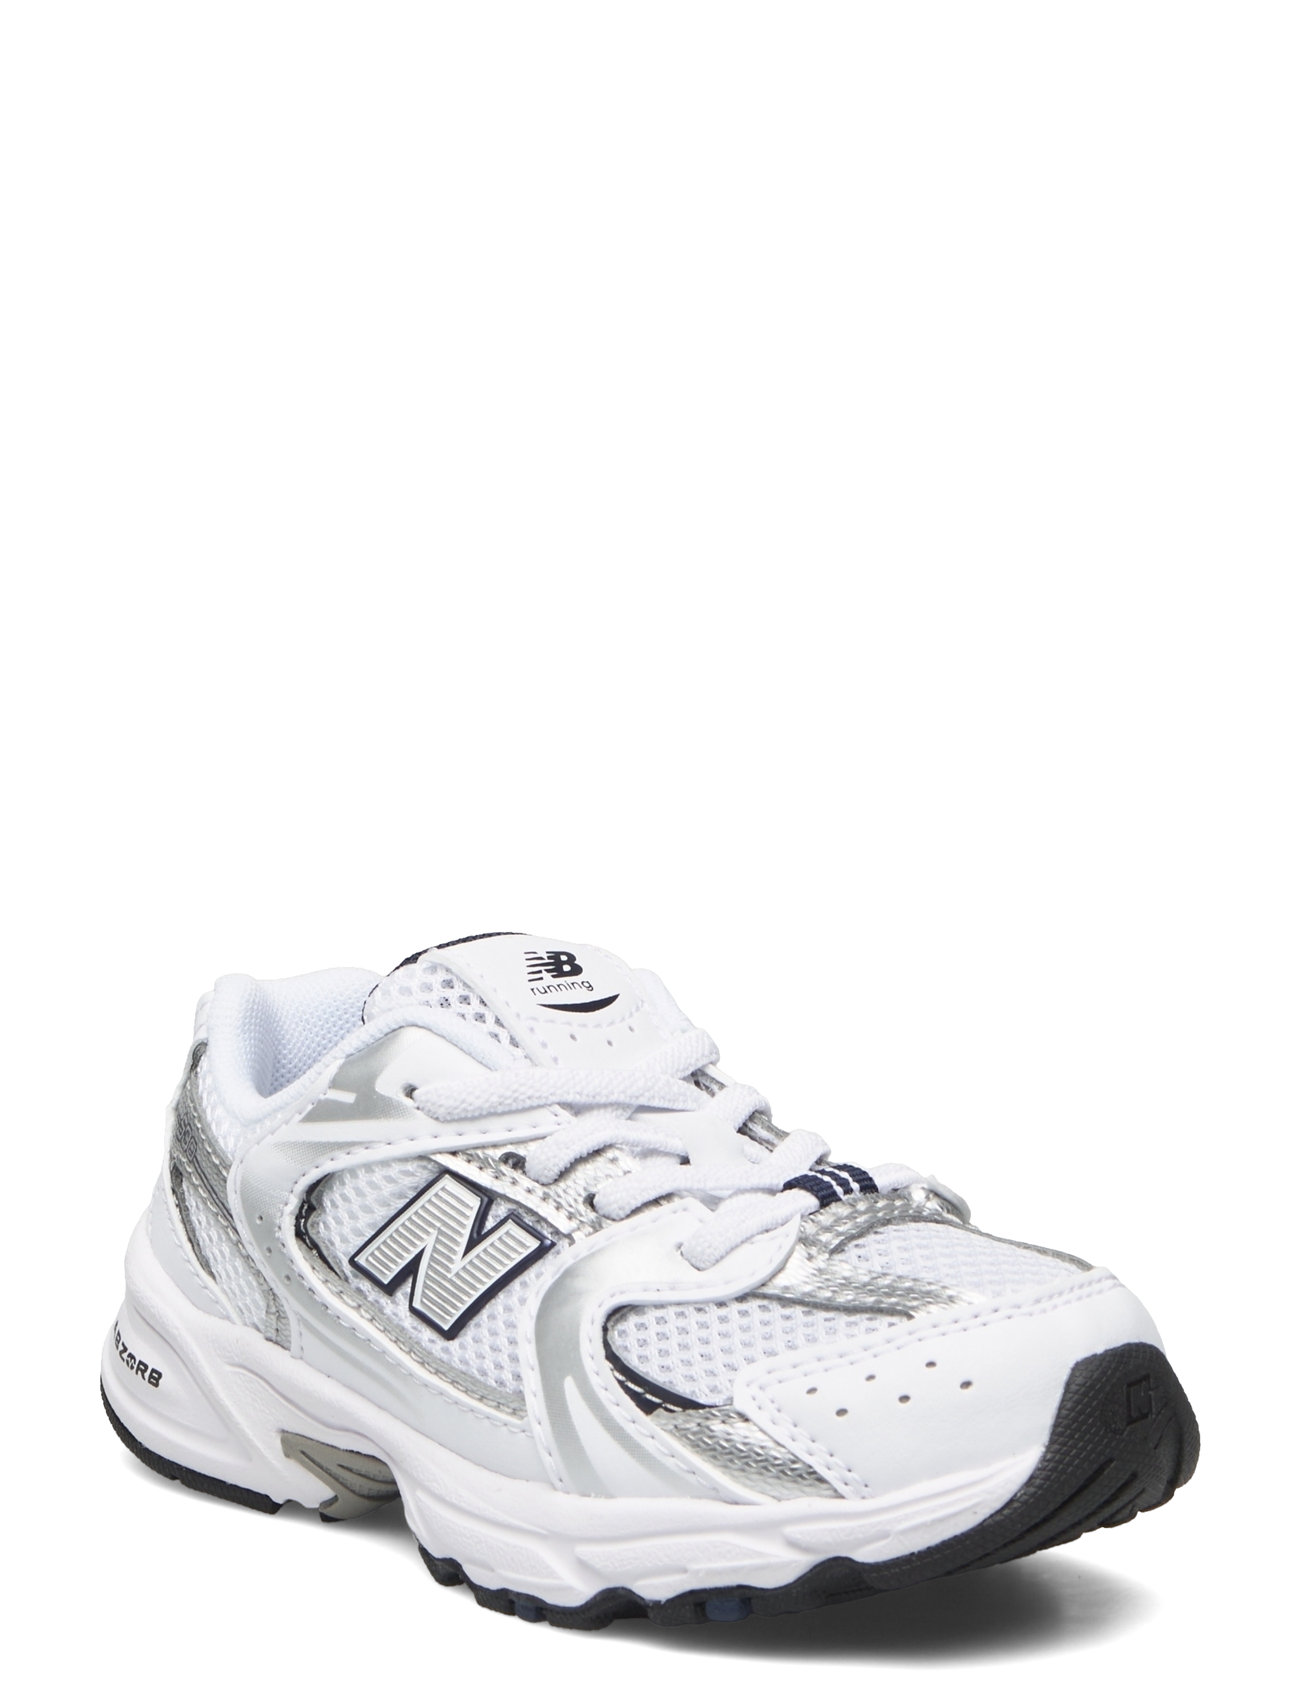 New Balance 530 Kids Bungee Lace Sport Sports Shoes Running-training Shoes White New Balance